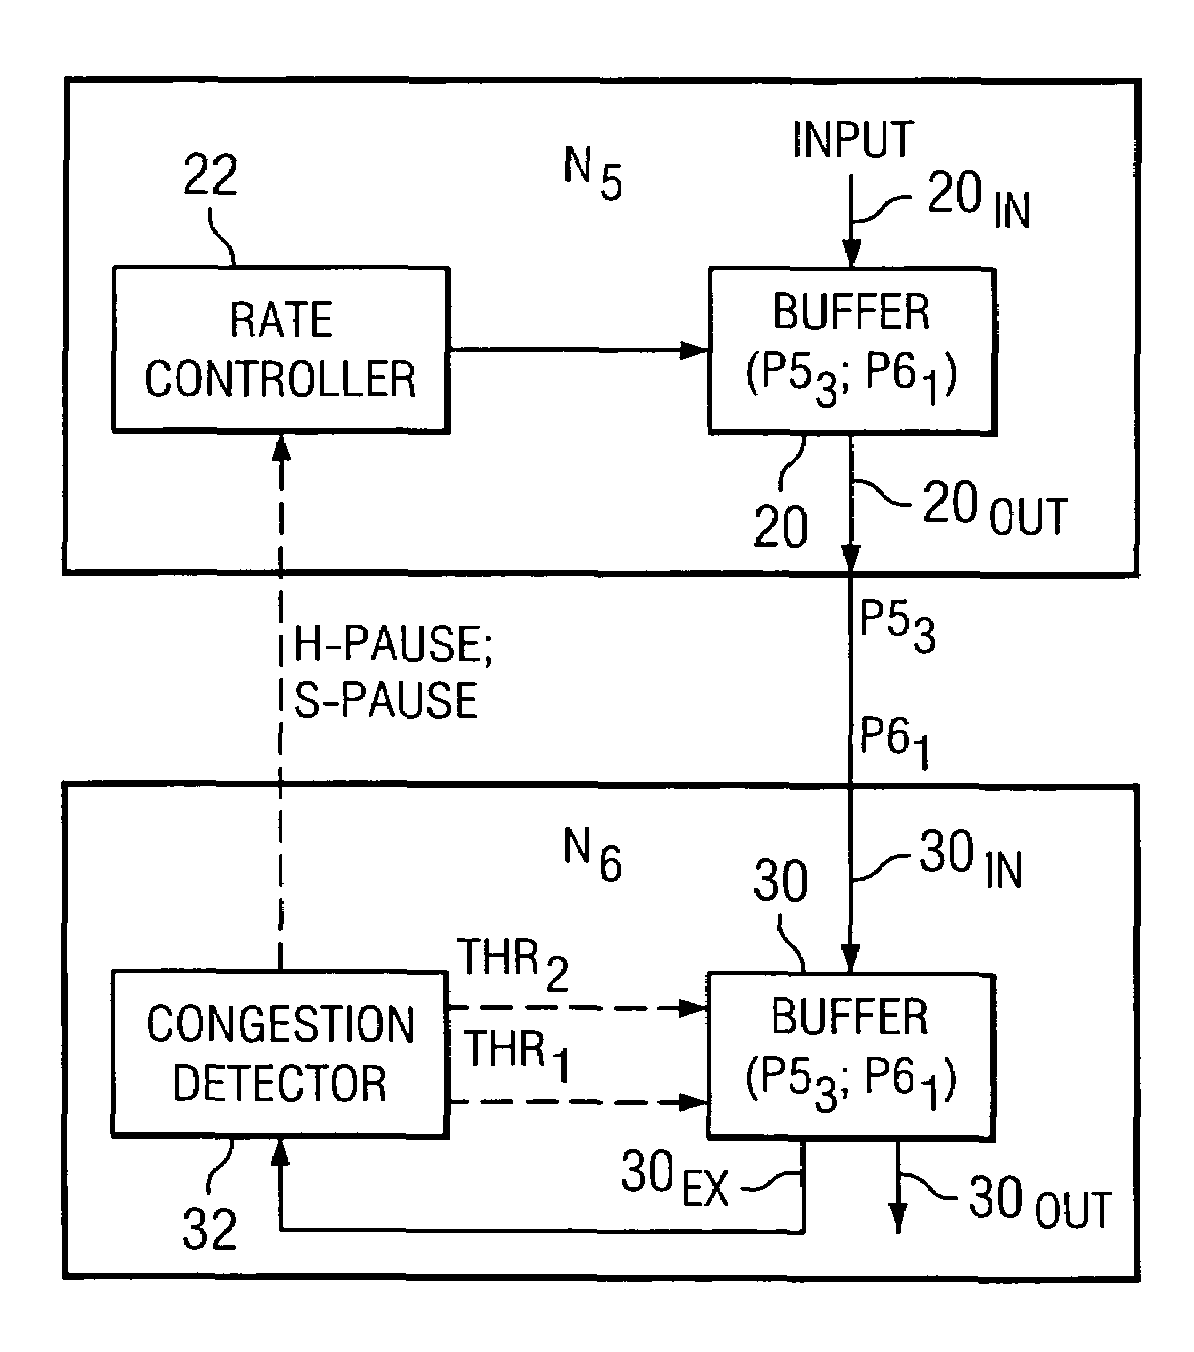 Network system with color-aware upstream switch transmission rate control in response to downstream switch traffic buffering